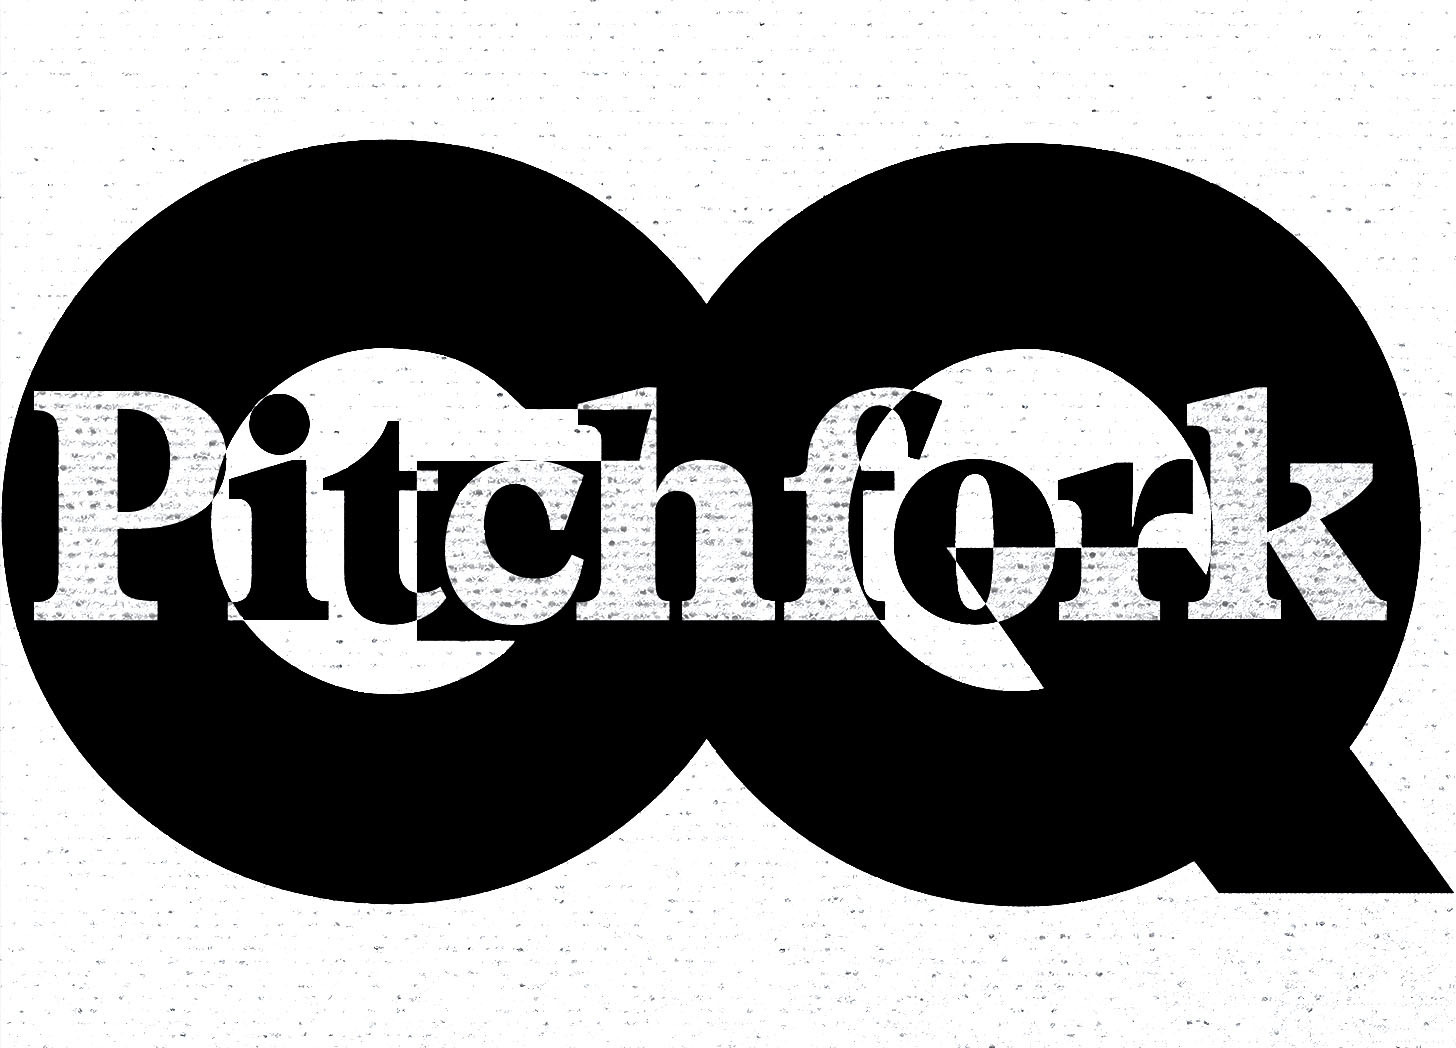 Black-and-white logo for Pitchfork is layered on top of the GQ logo in black. Both are against a white background with gray speckles